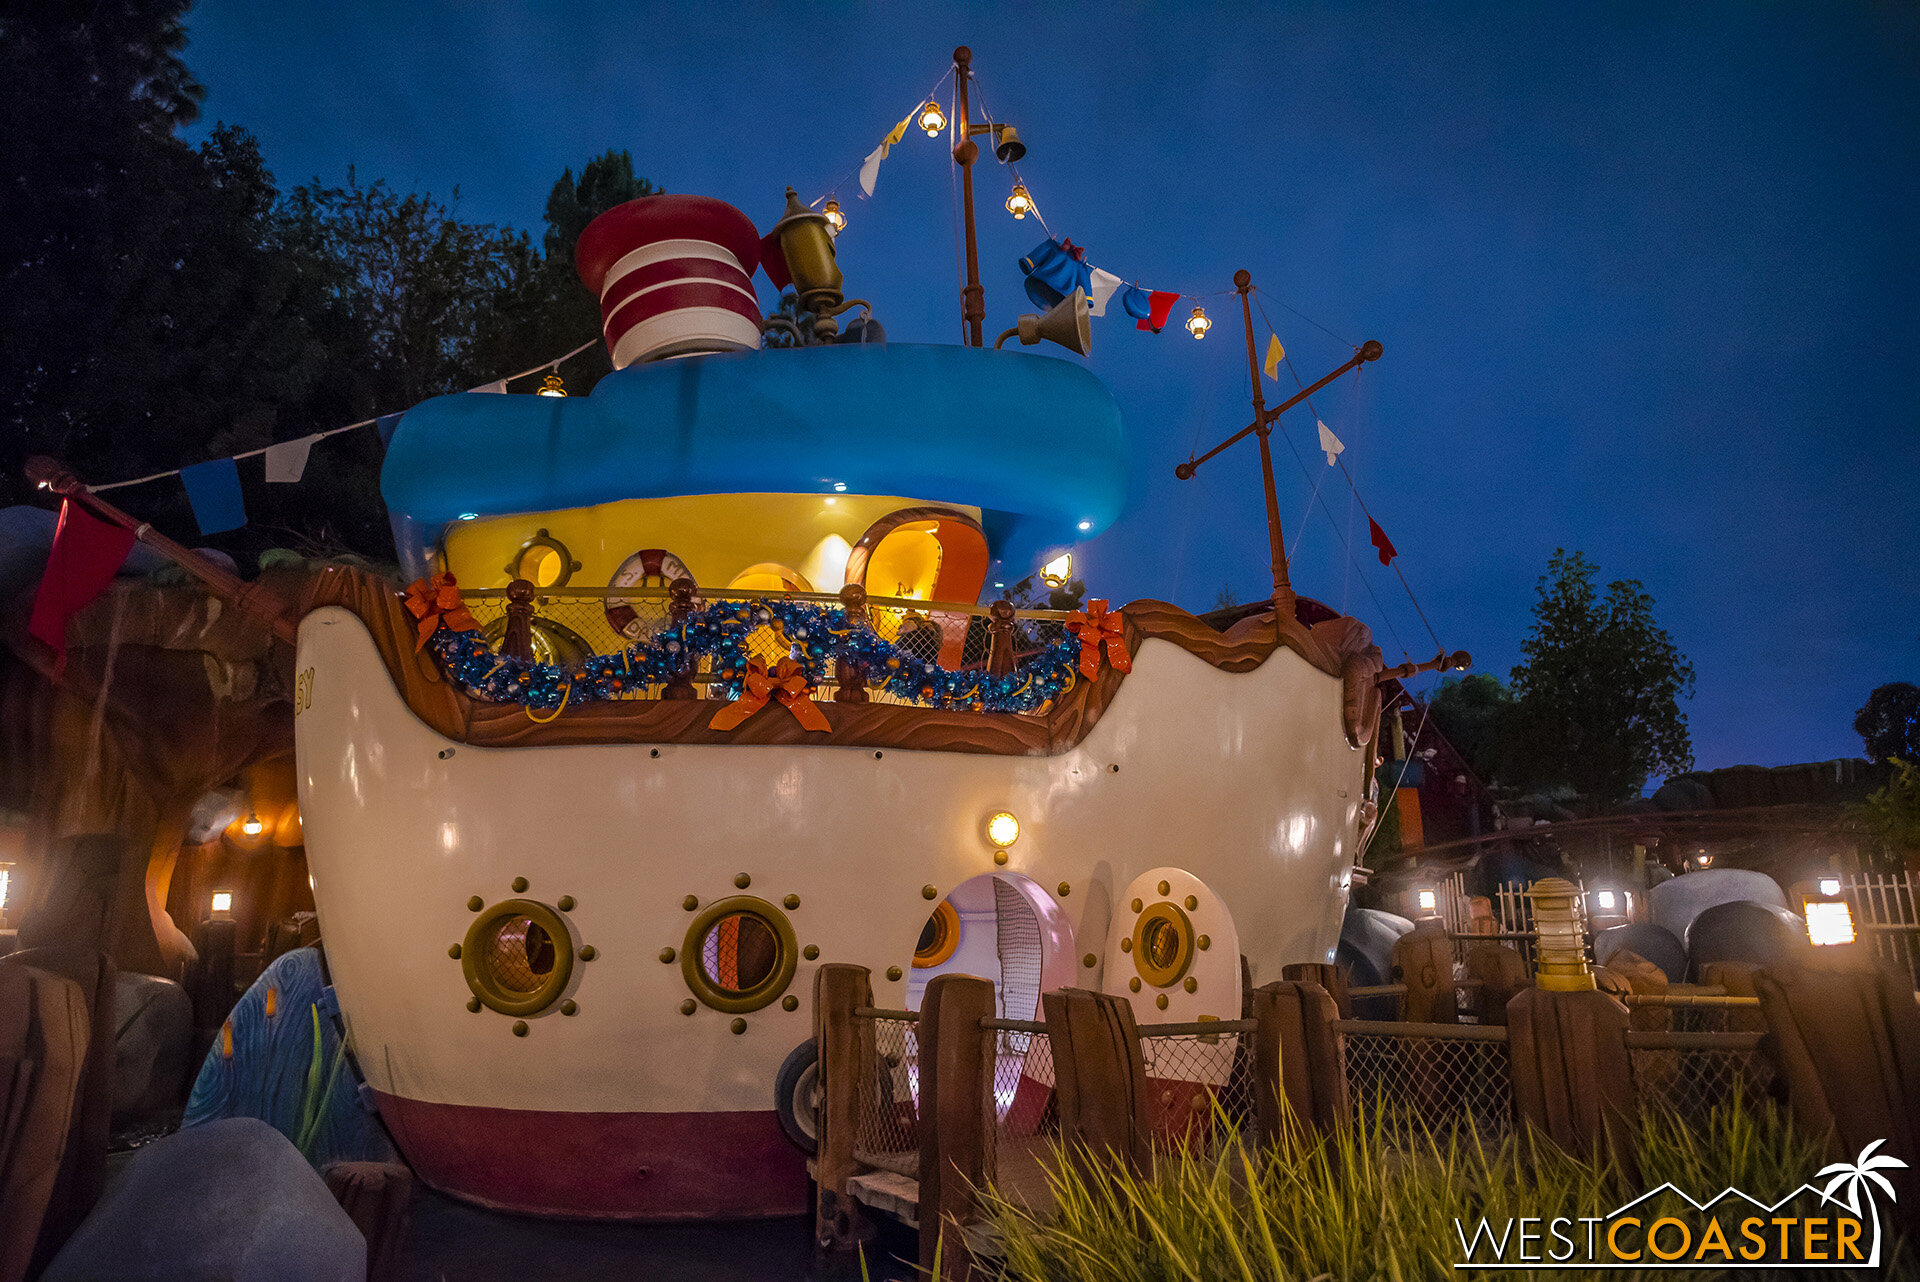  Donald’s Boat is all lit up too! 